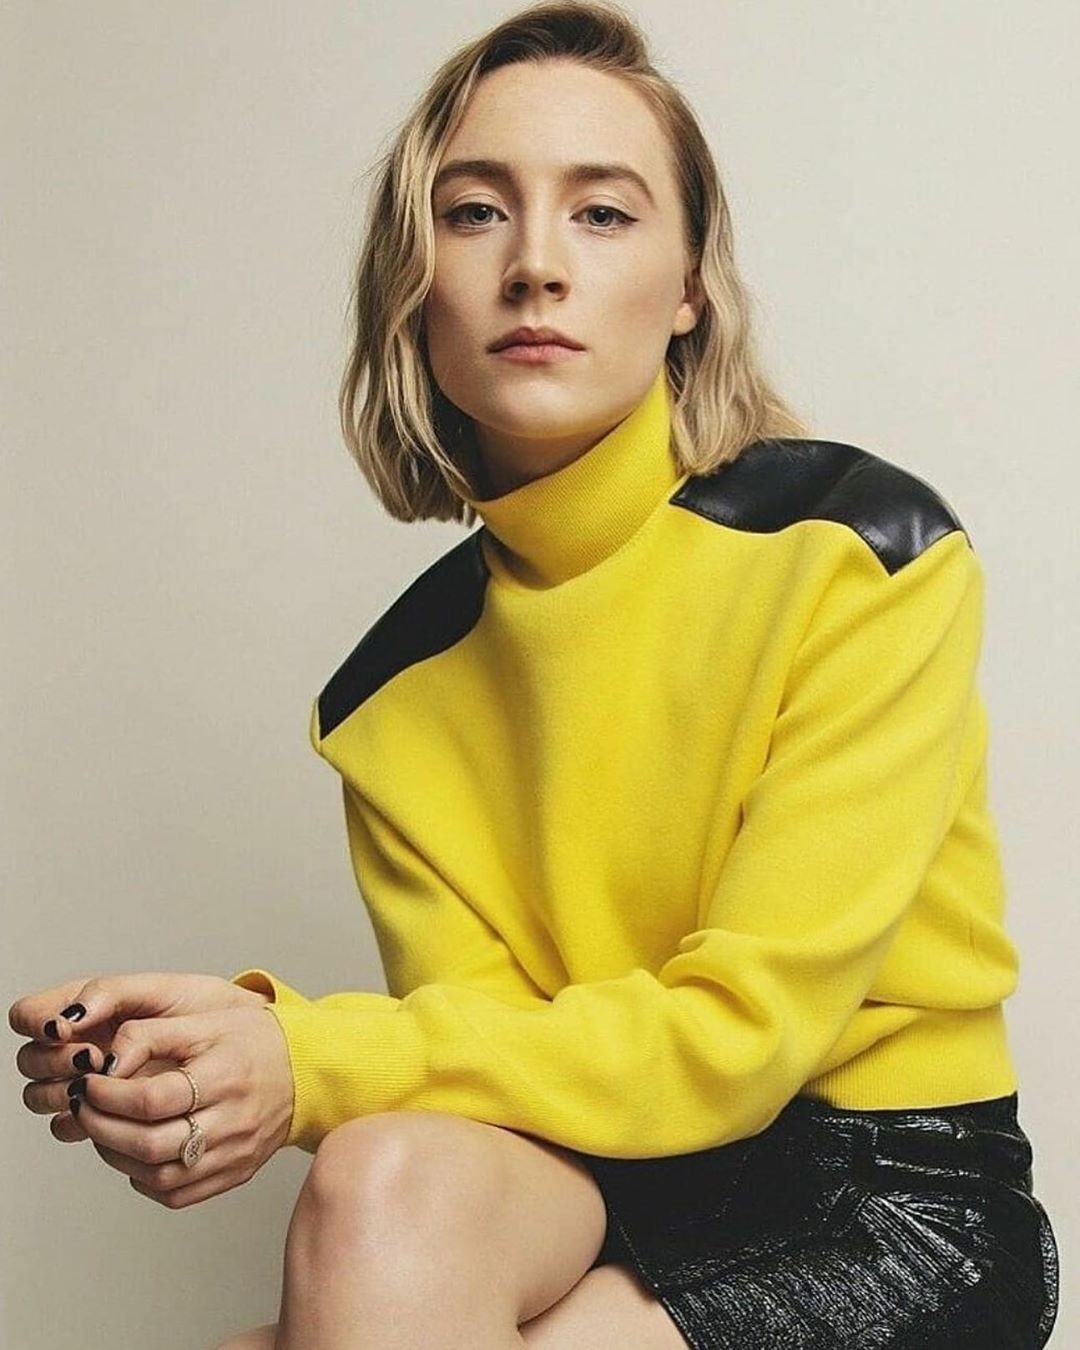 Saoirse Ronan’s warm, friendly, unpretentious personality has attracted friends as well as the admiration of fans. Photo: Instagram